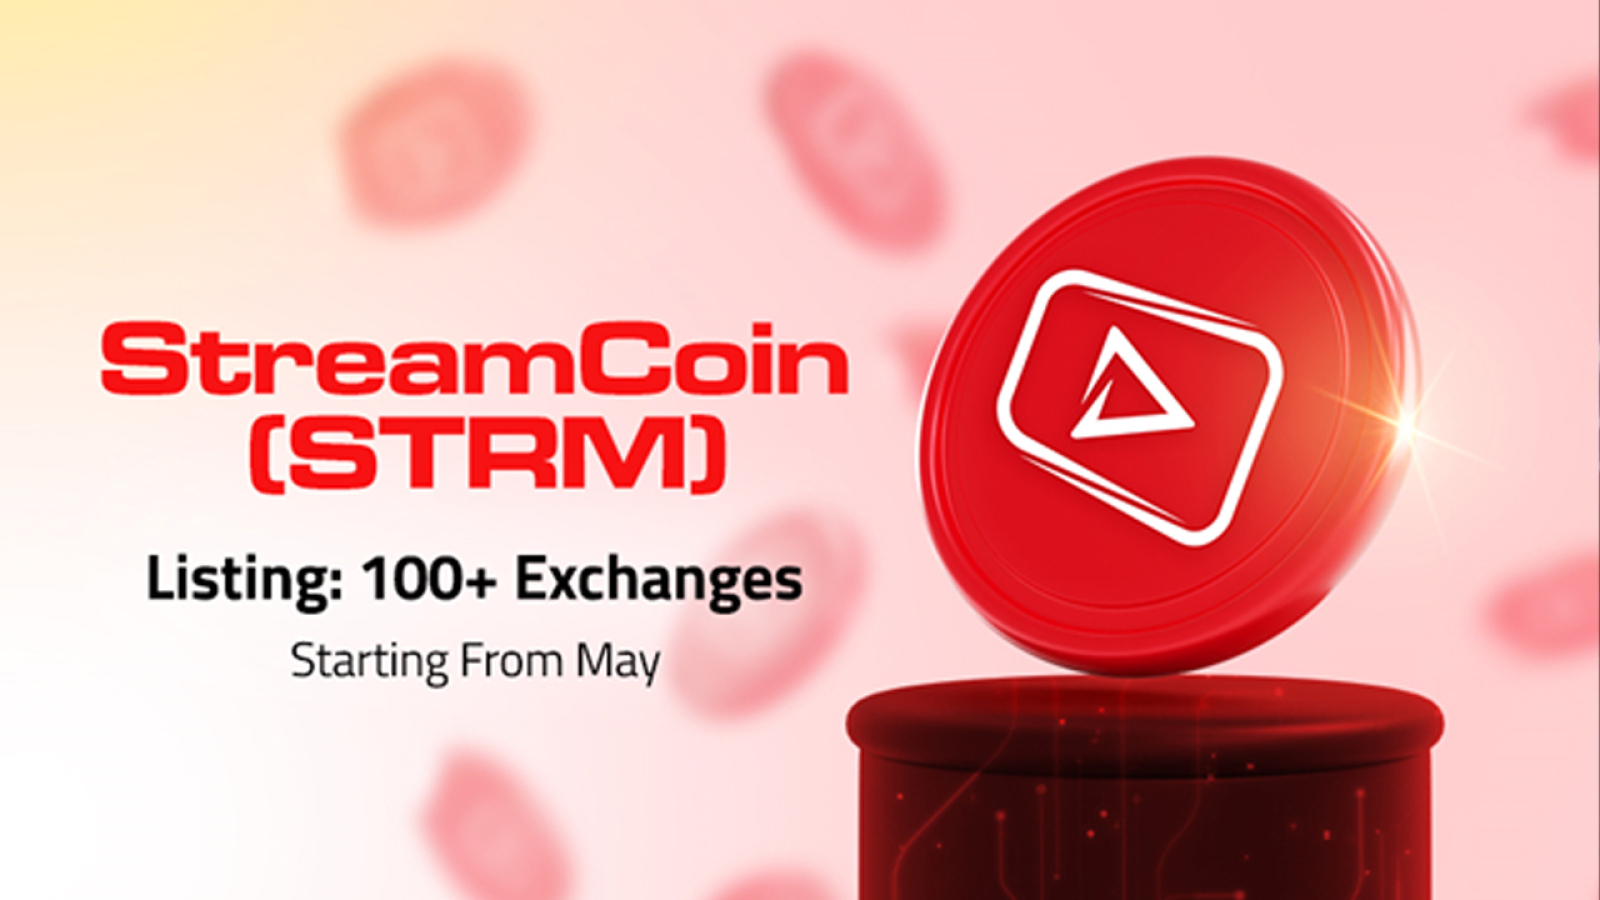 StreamCoin (STRM) Listing: 100+ Exchanges Starting From May